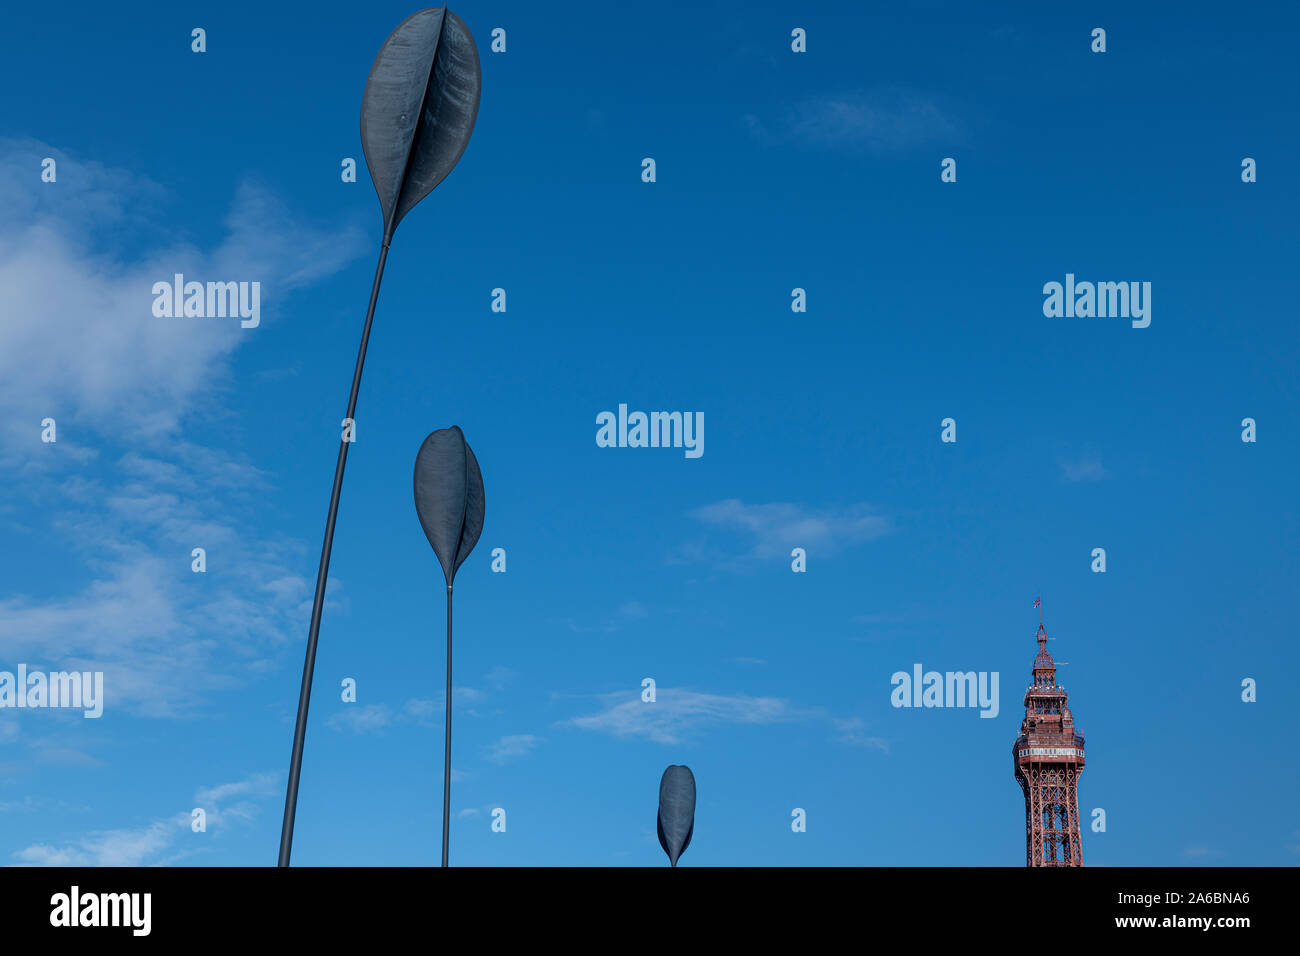 'Dune Grass' swaying sculptures on Blackpool promenade with the Tower. Stock Photo